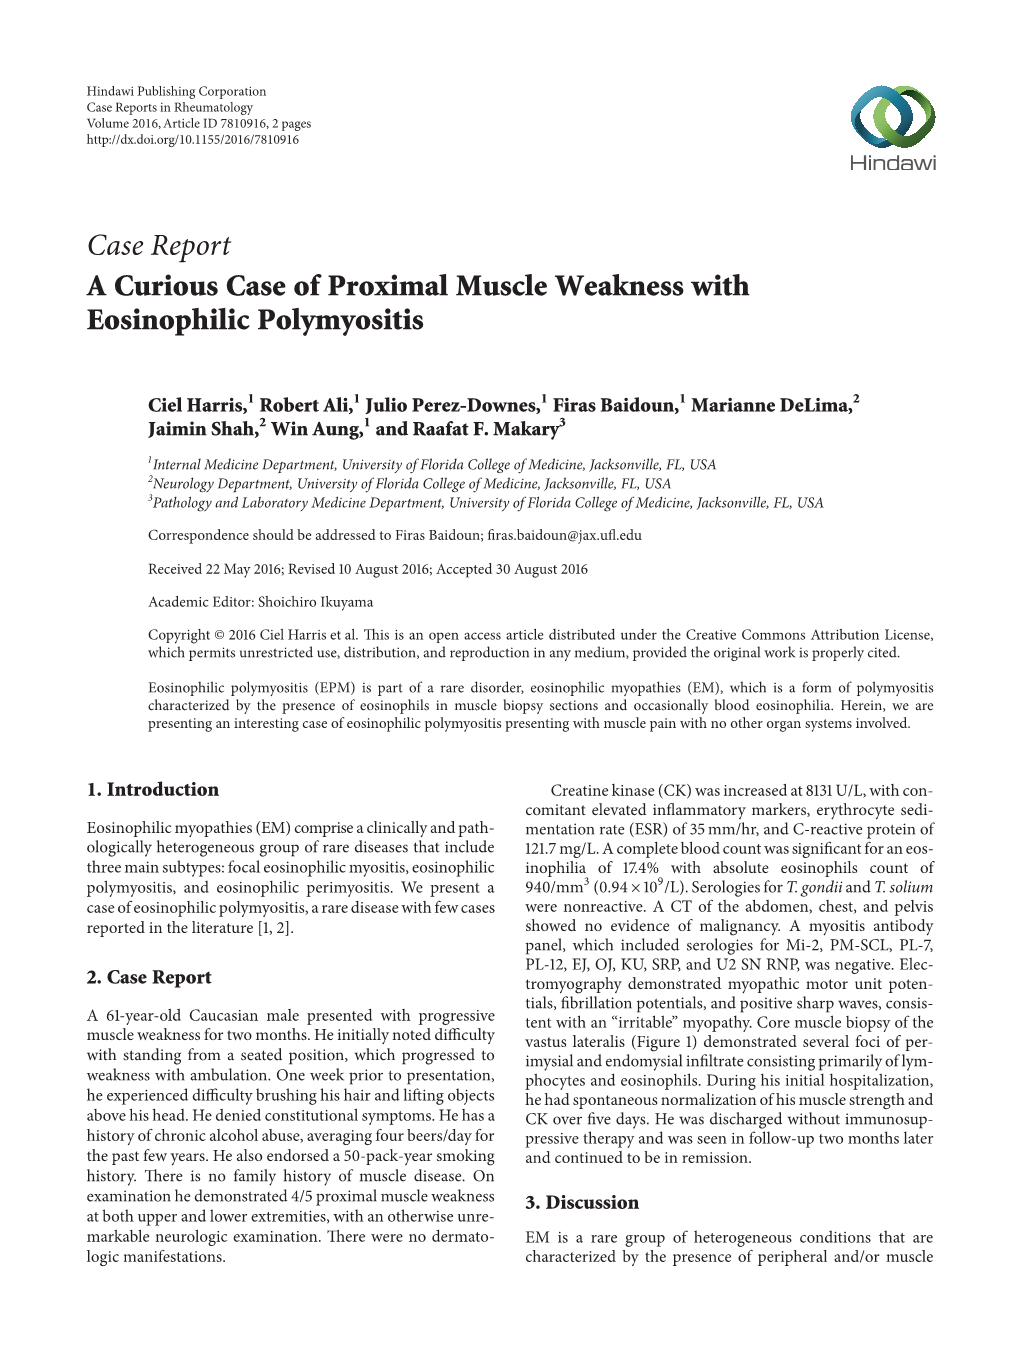 A Curious Case of Proximal Muscle Weakness with Eosinophilic Polymyositis